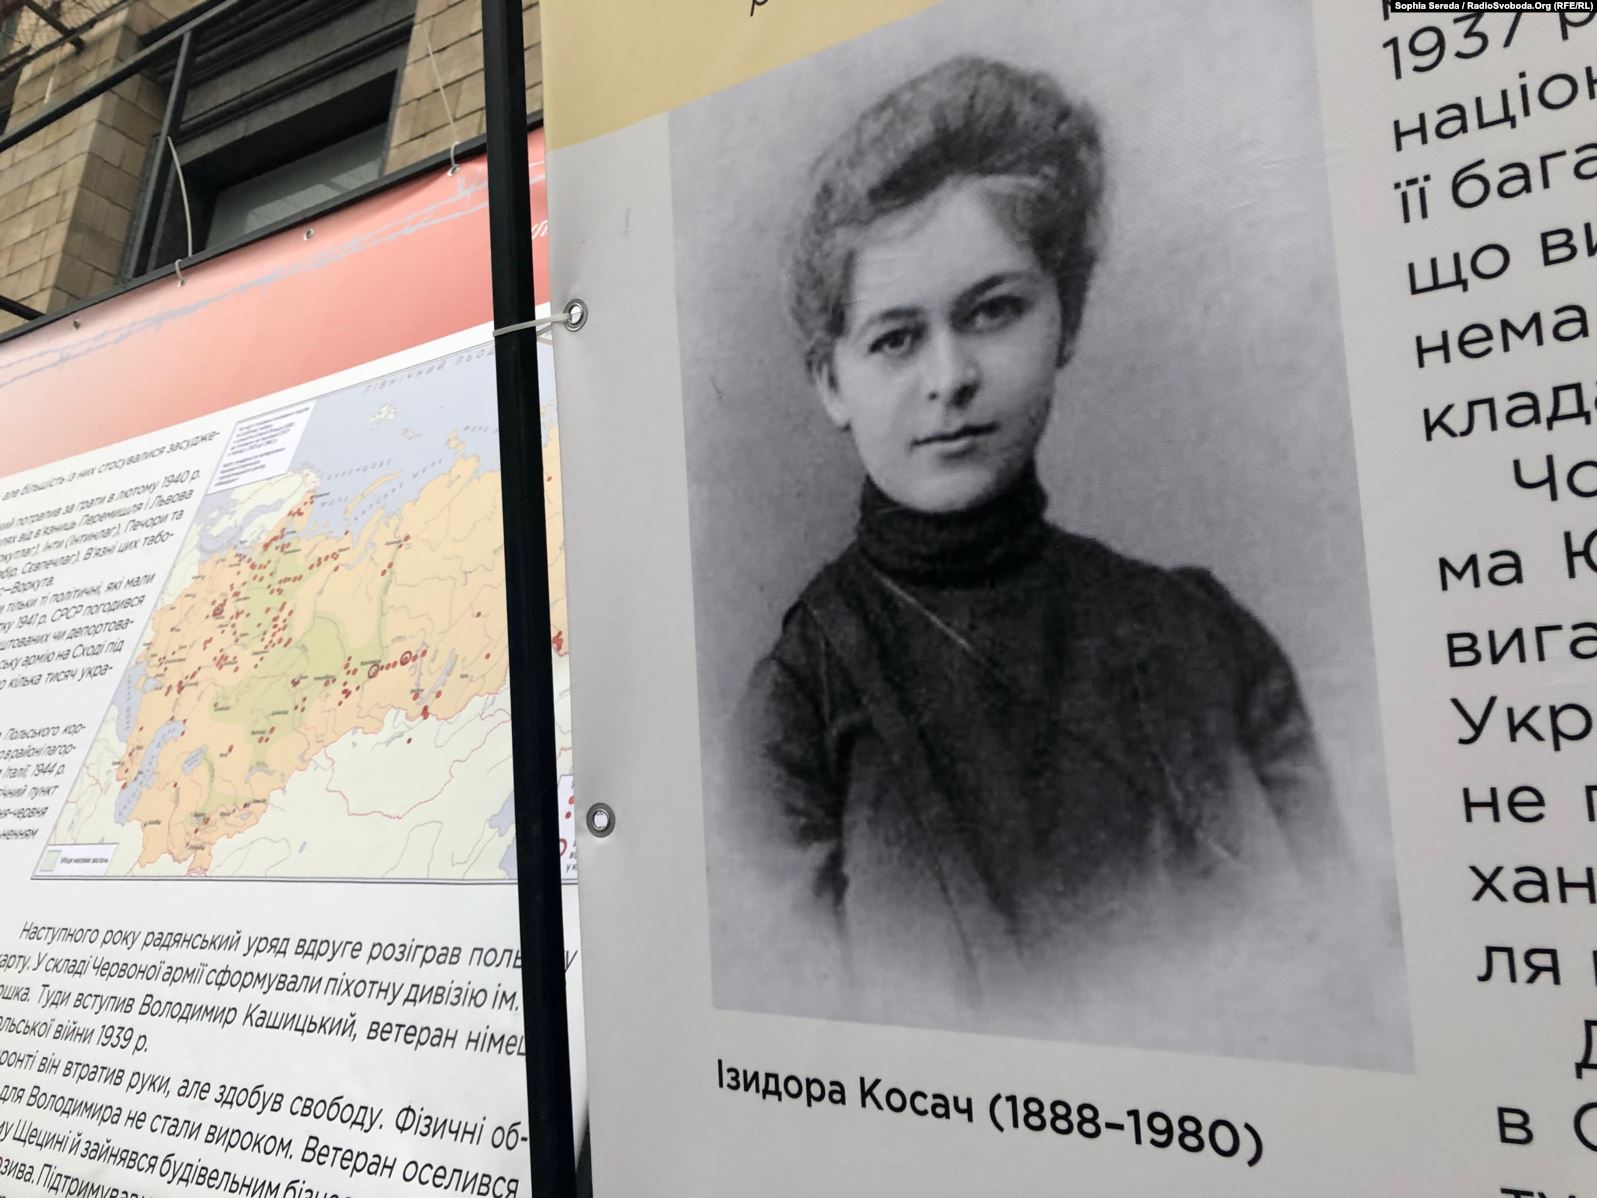 Later having emigrated, Izydora Kosach stressed that she wouldn’t come to Ukraine, “as long as slavery reigns there and innocent people are being arrested.” ~